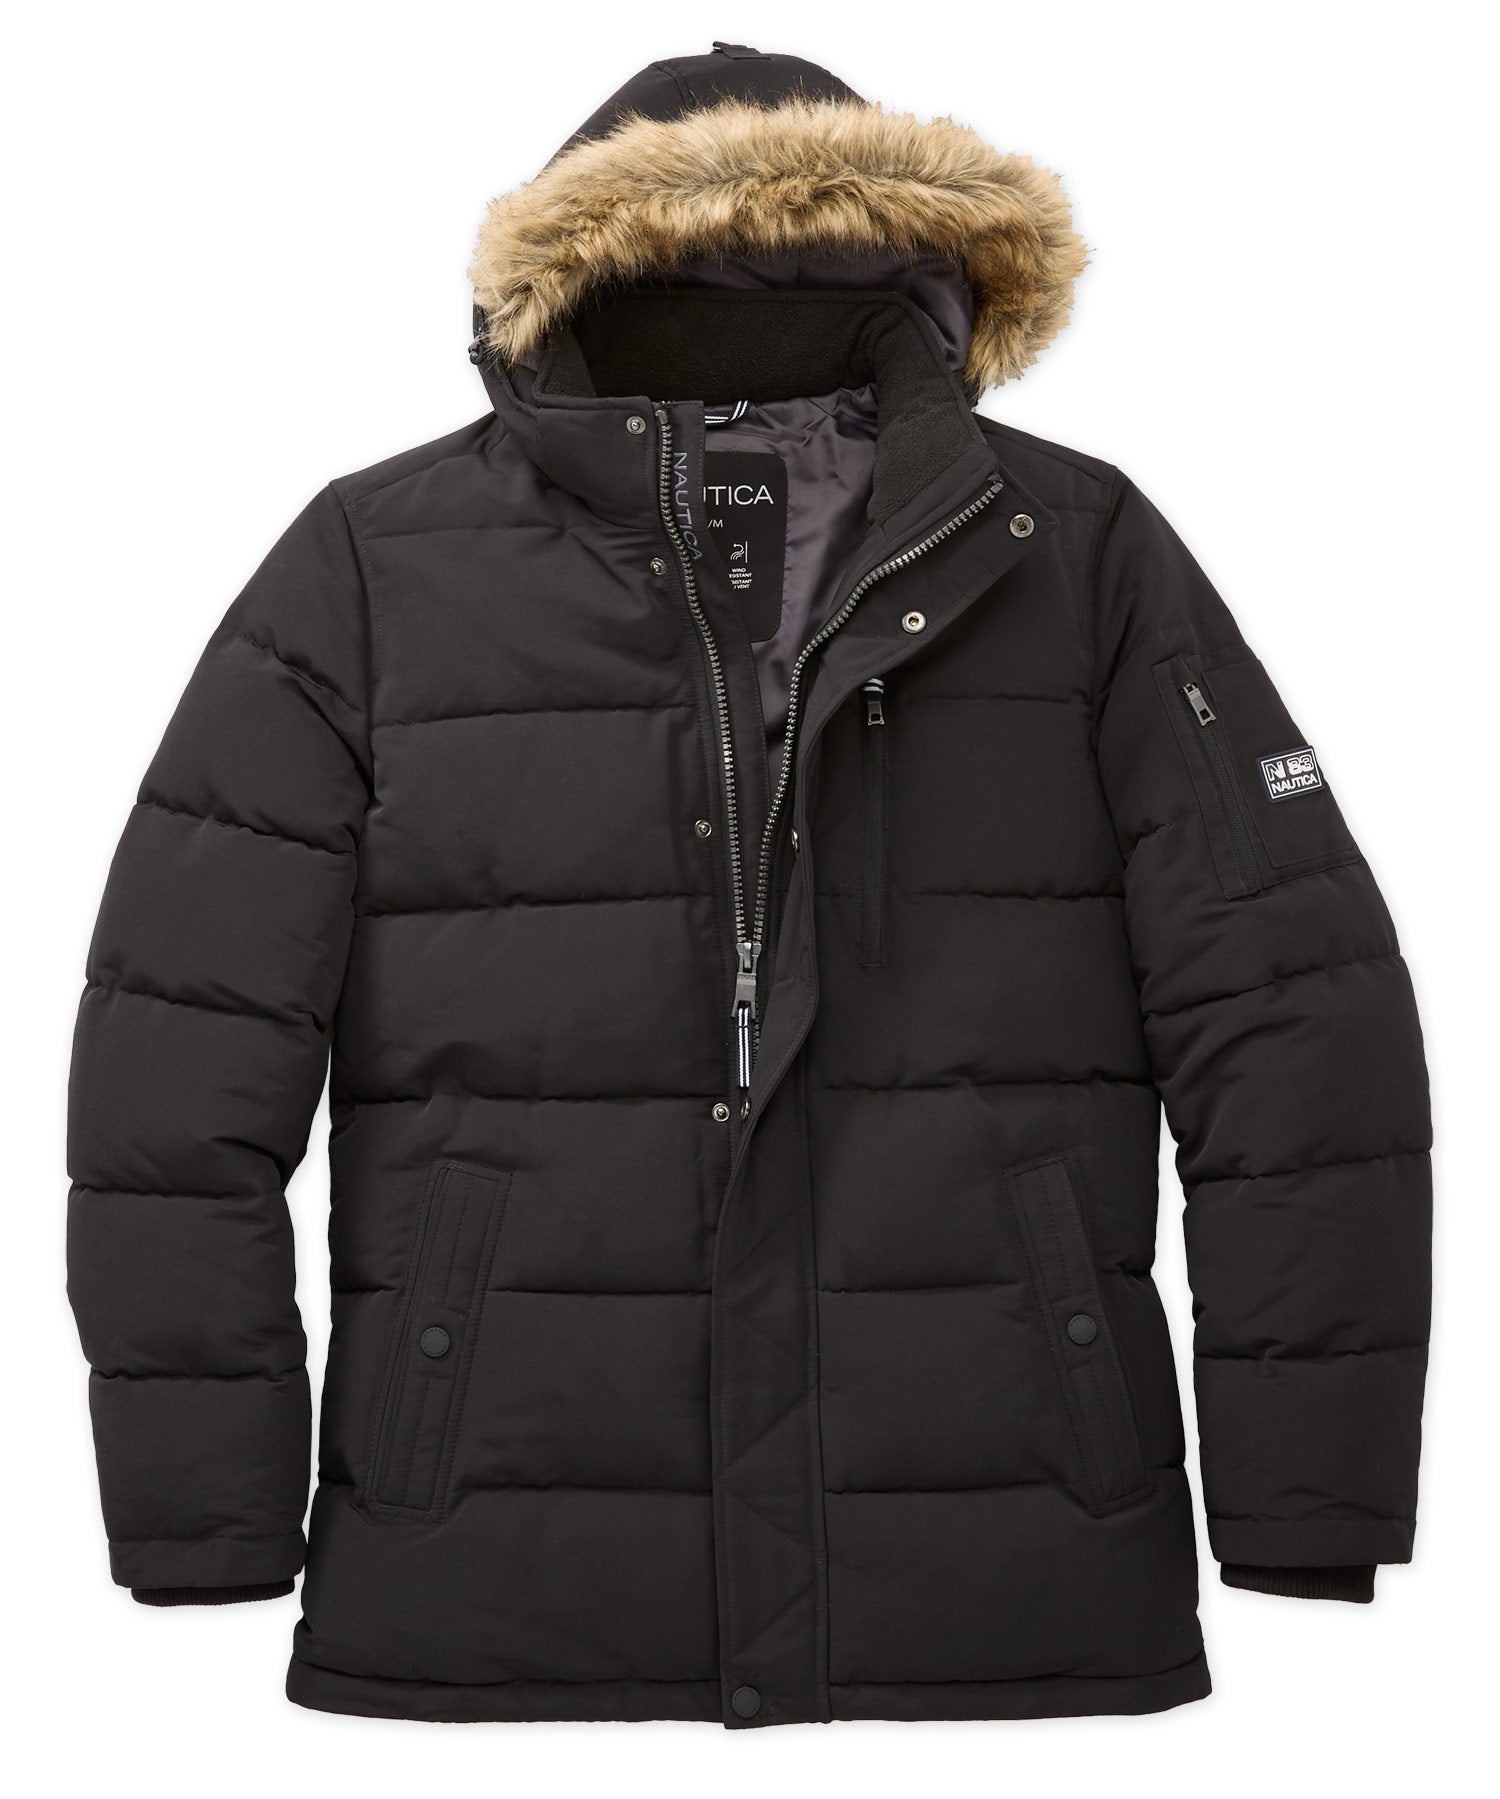 Men's Snap Front Quilted Faux Fur Collar Jacket